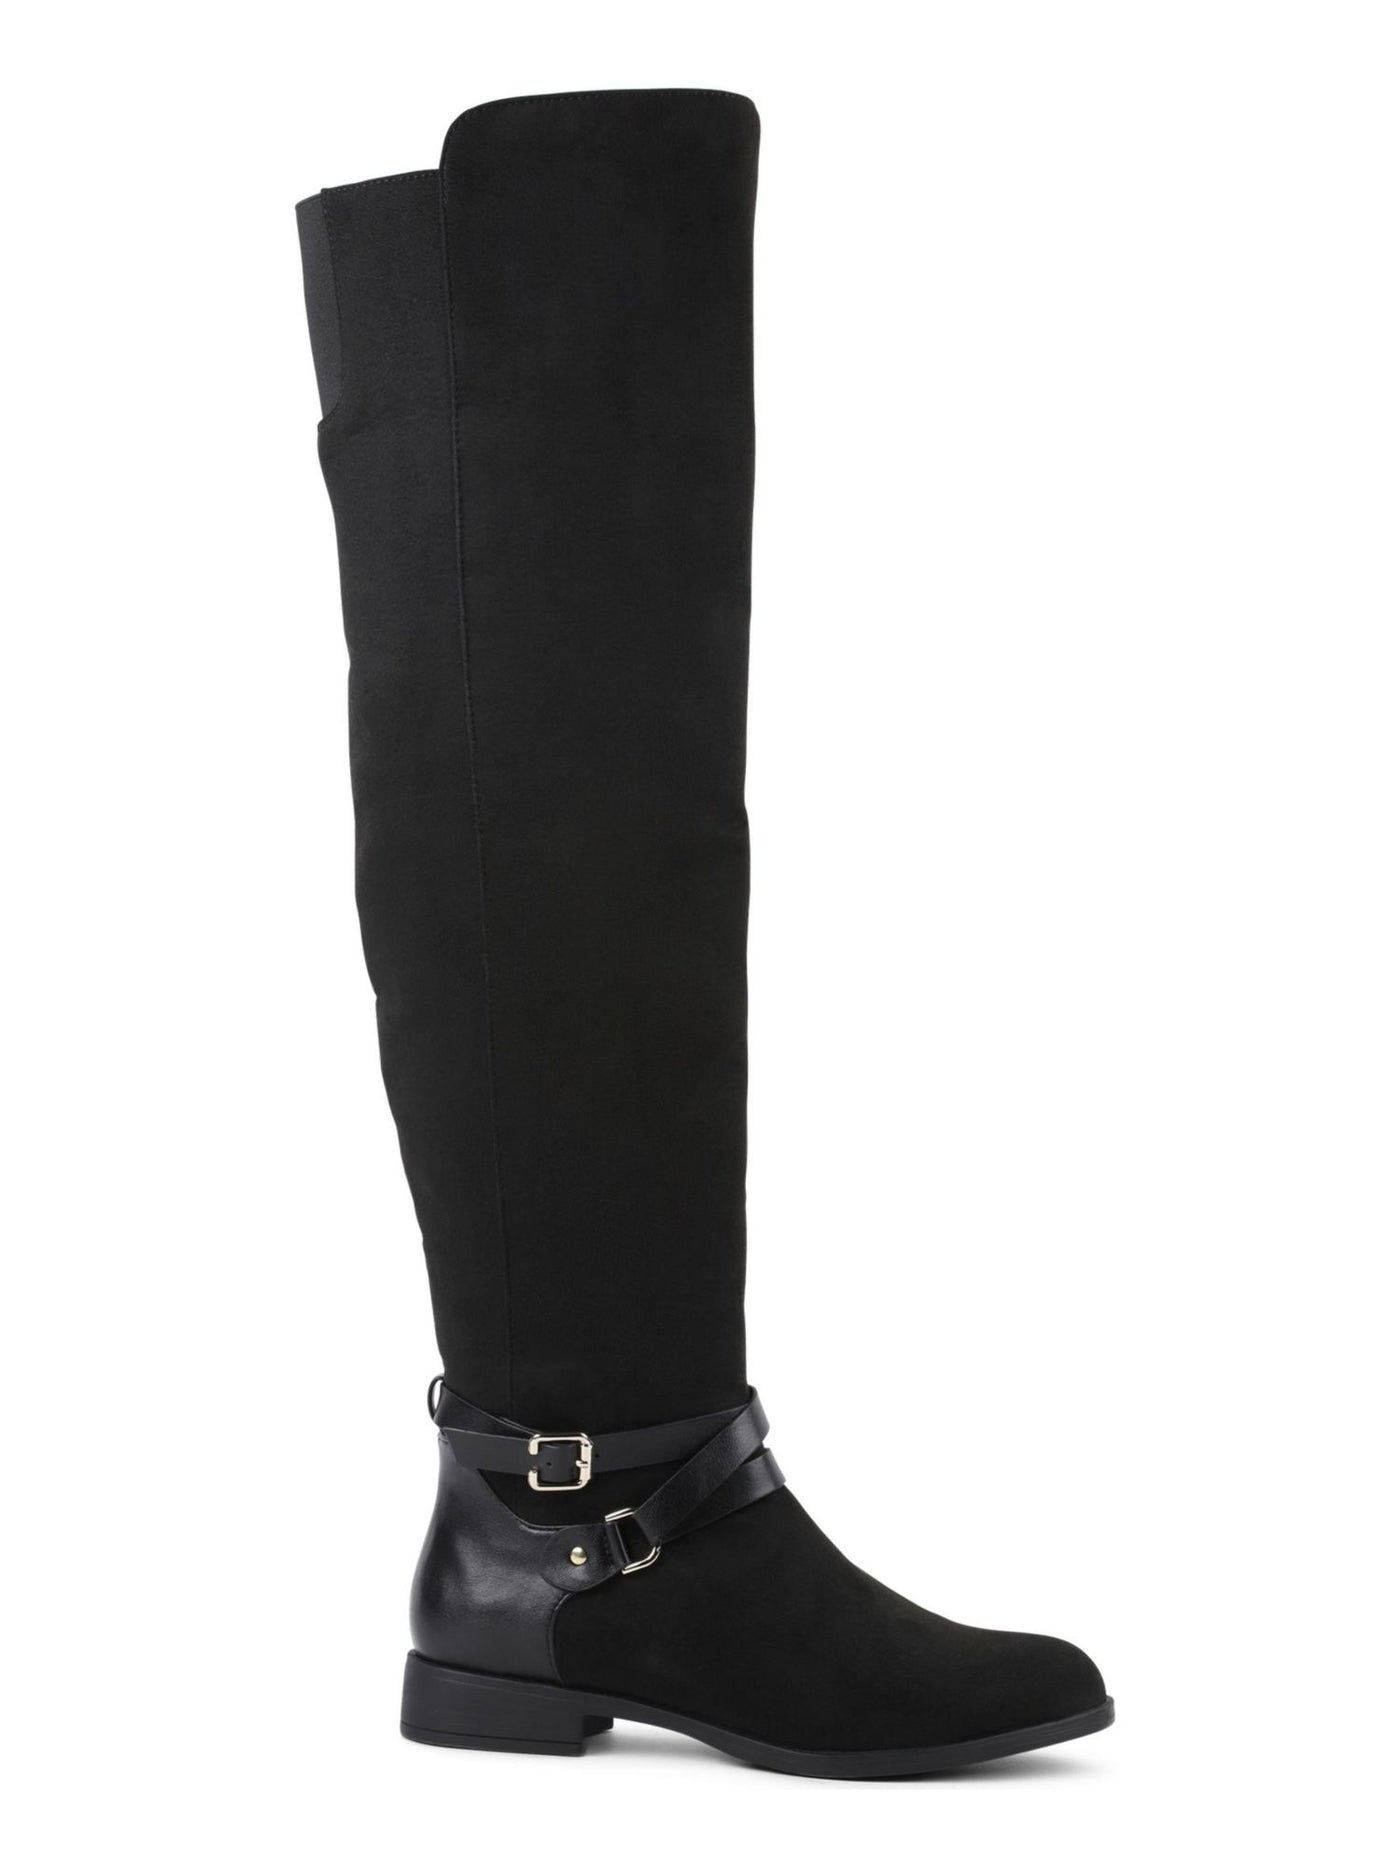 XOXO Womens Black Buckle Accent Stretch Dress Boots Shoes 8.5